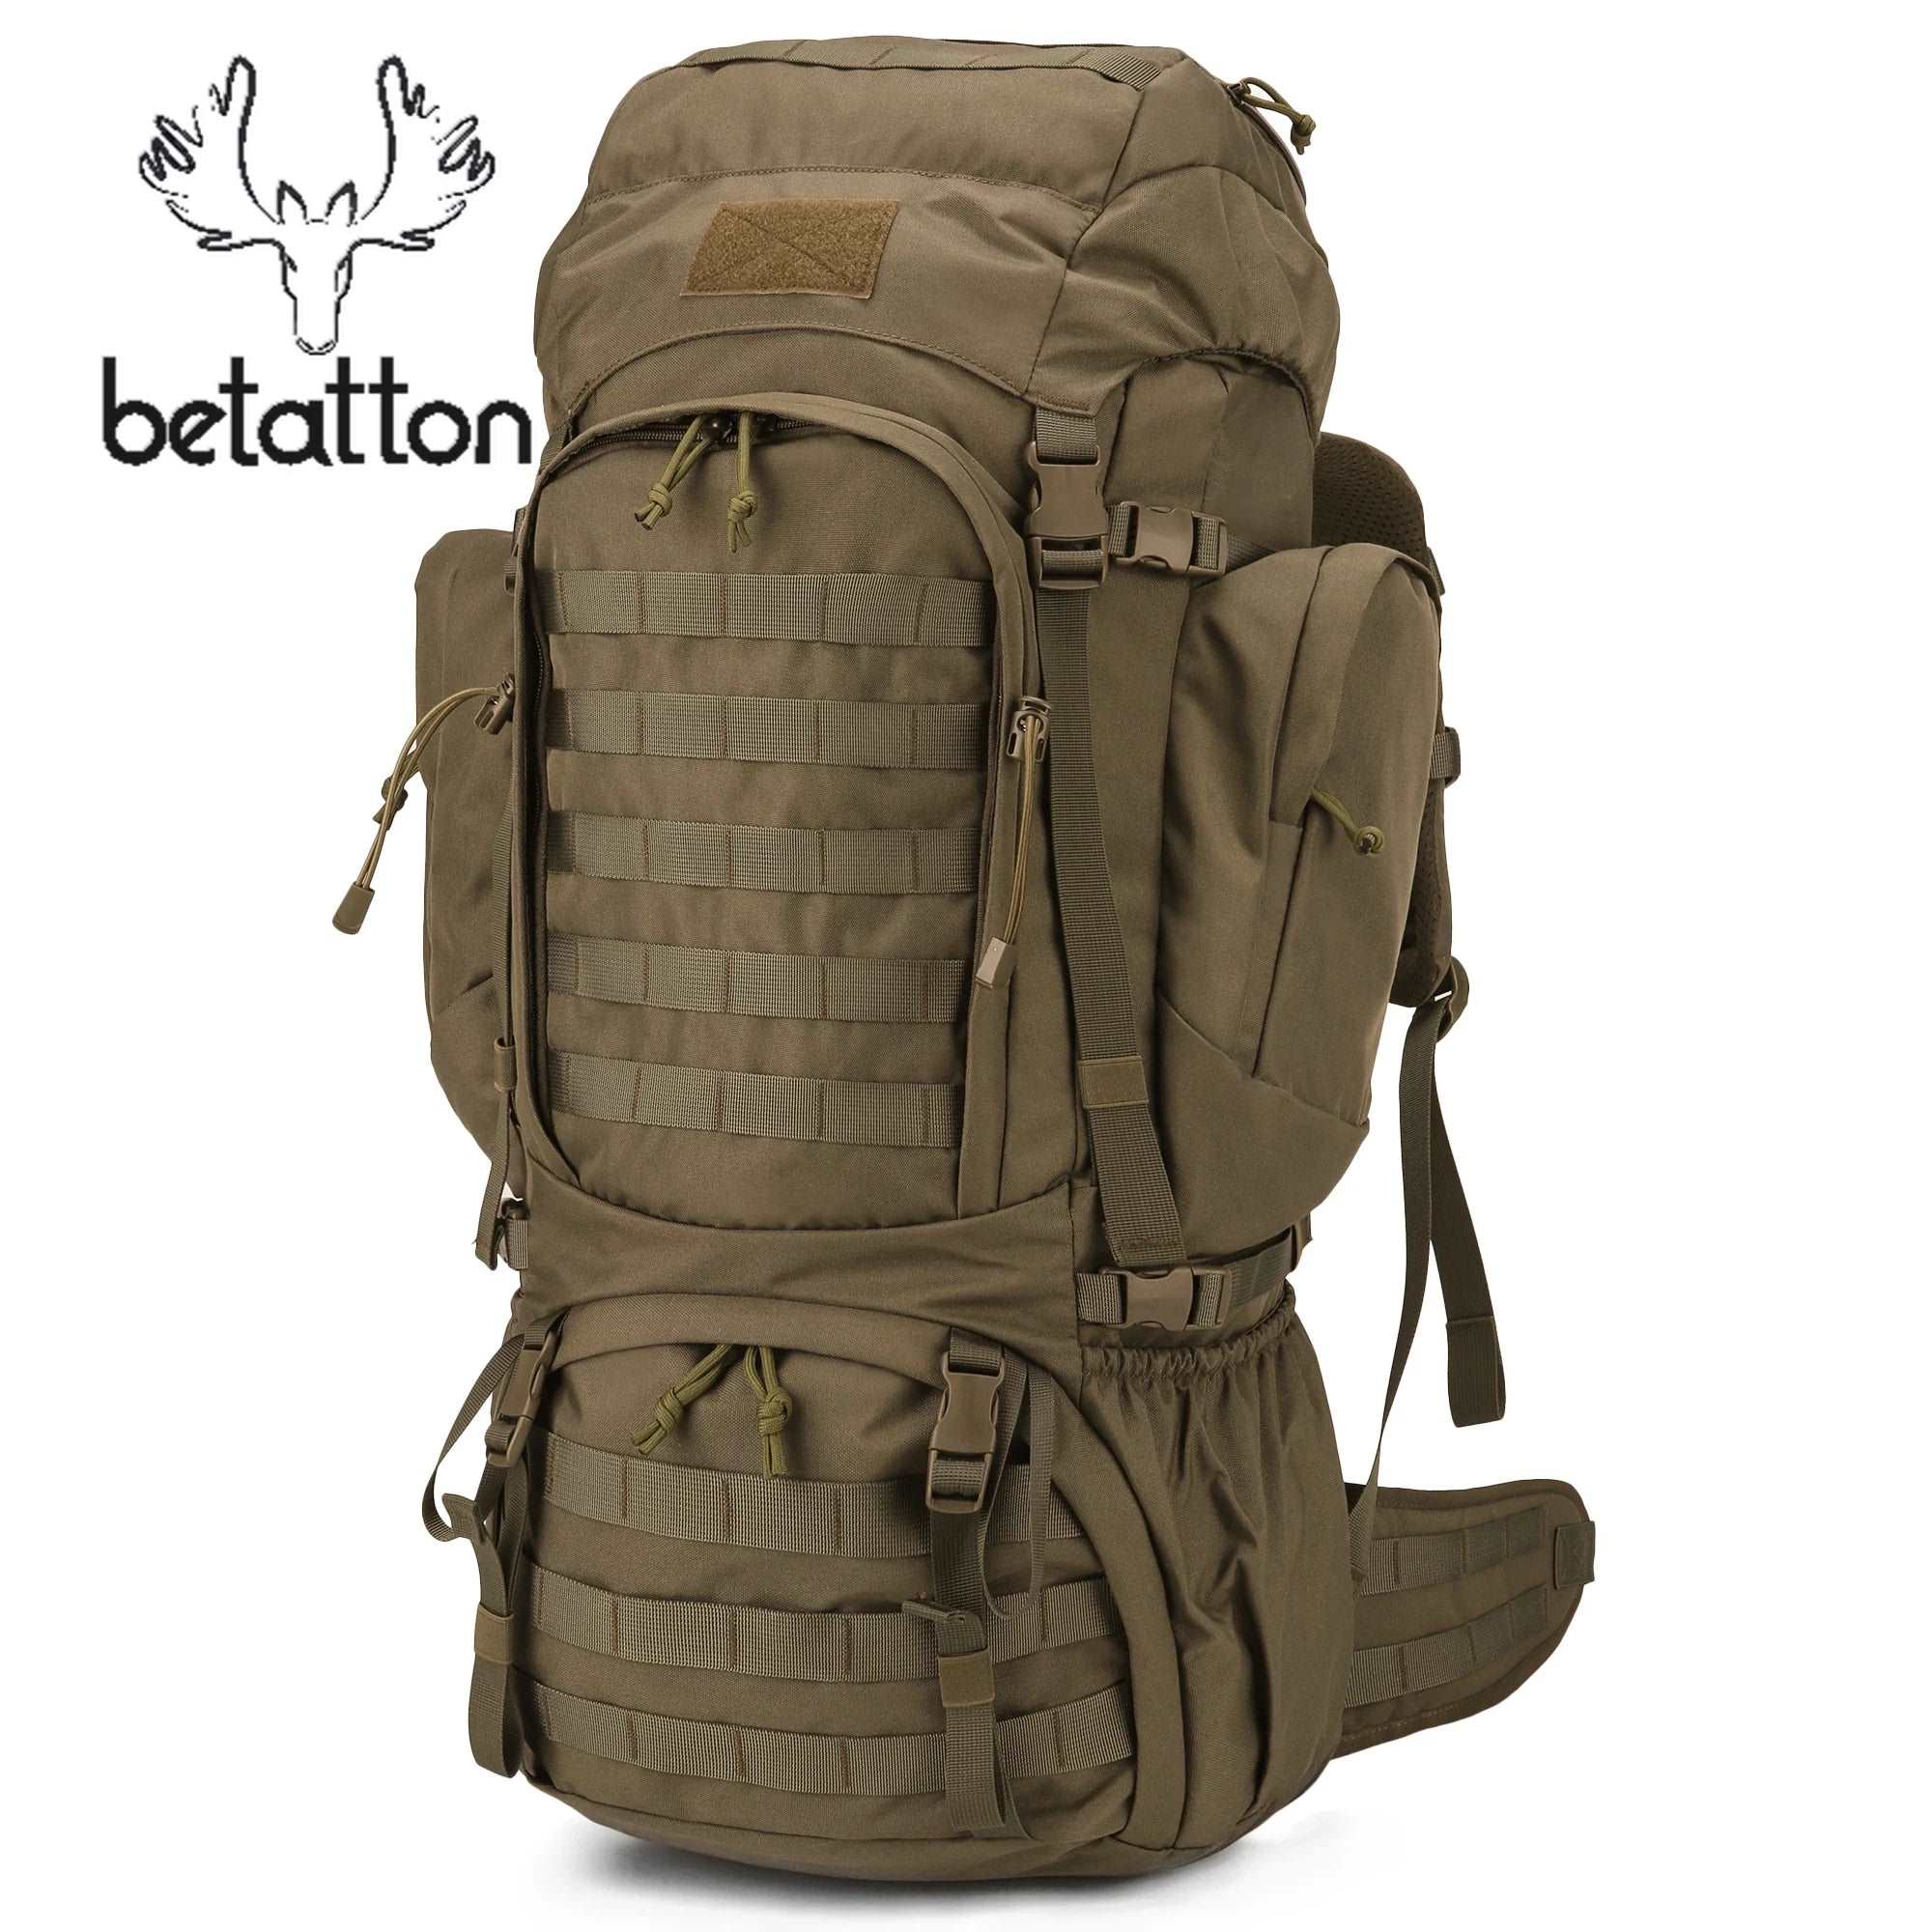 60L Tactical Backpacking Backpack - Military-Grade with Rain Cover for Camping, Hiking & Bushcraft - Betatton - 